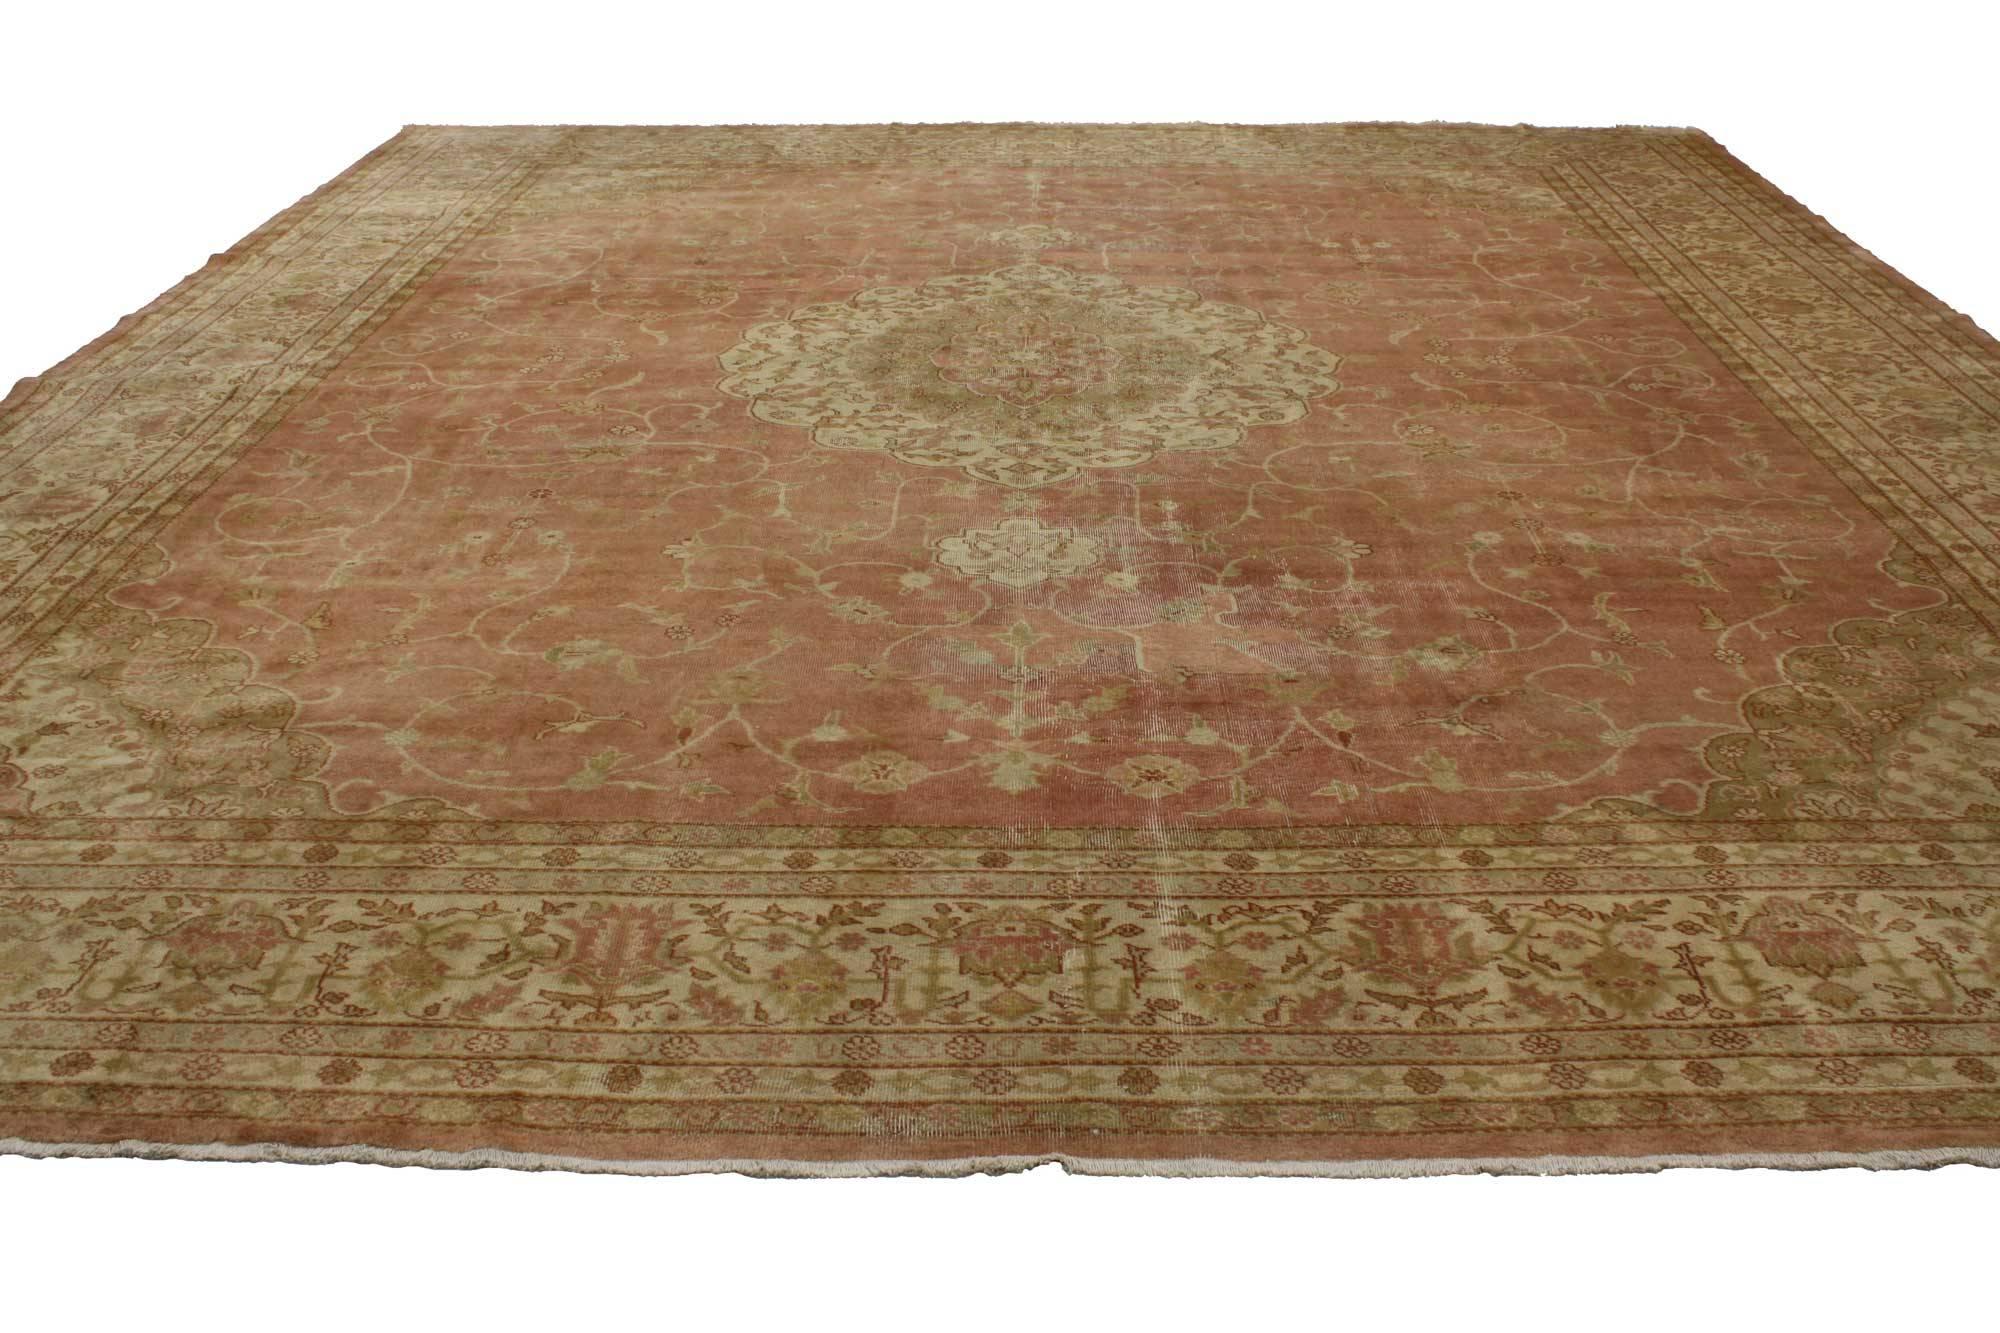 76817, Distressed Antique Turkish Sivas Palace Rug with Arts and Crafts Style. Immersed in Anatolian history and warm colors, this hand-knotted wool vintage Turkish Sivas area rug embodies true Artisan style. Taking center stage is a large-scale